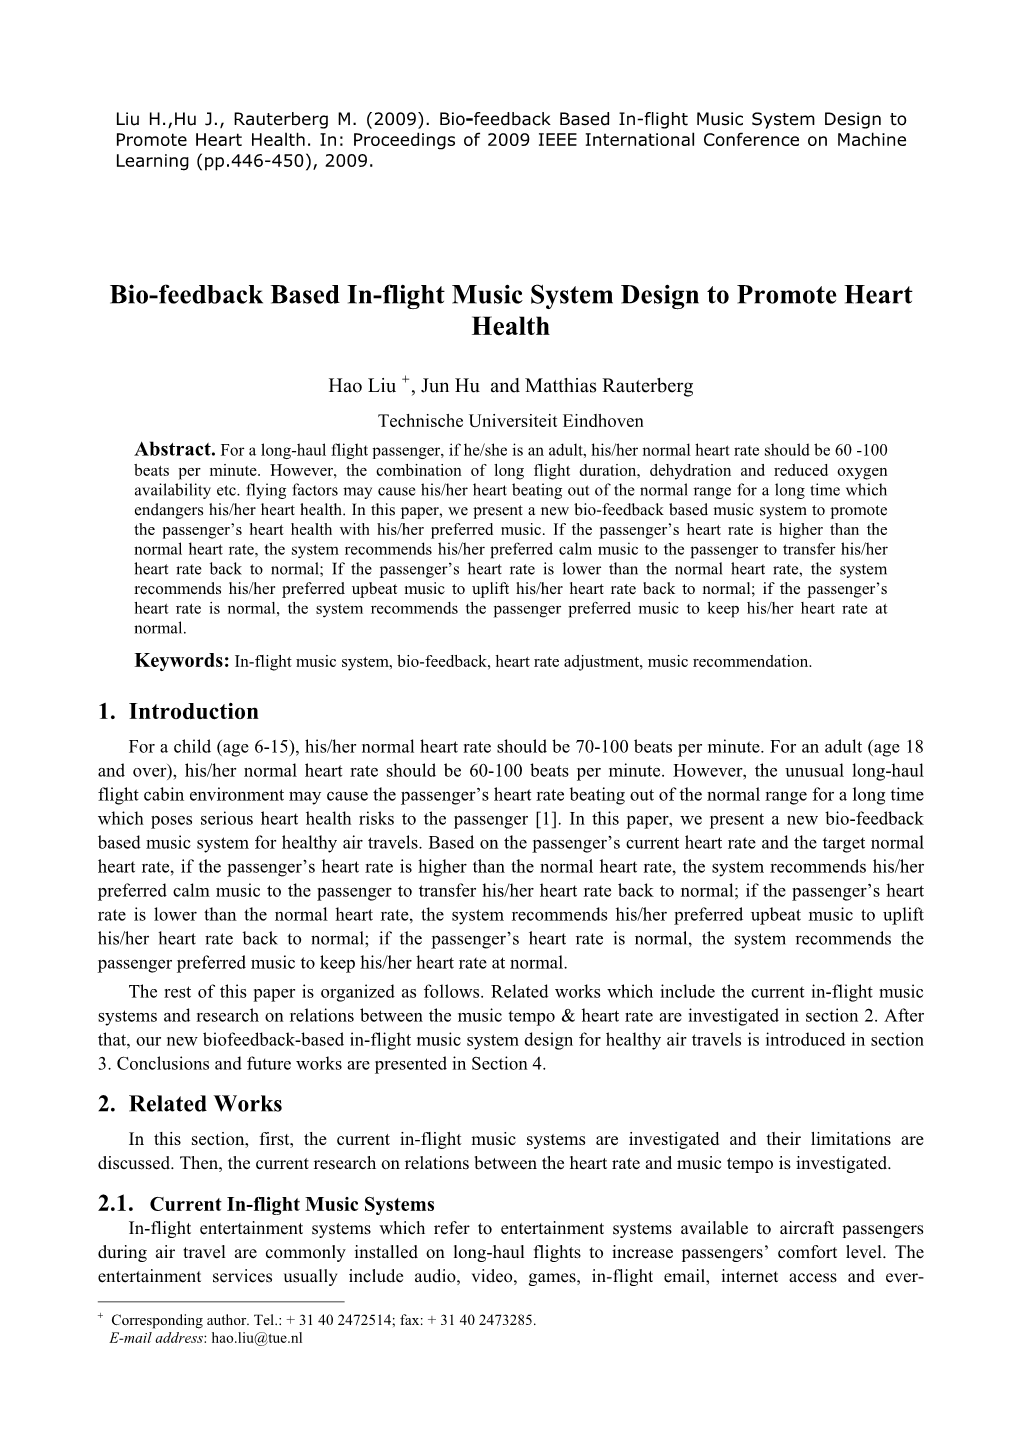 Bio-Feedback Based In-Flight Music System Design to Promote Heart Health